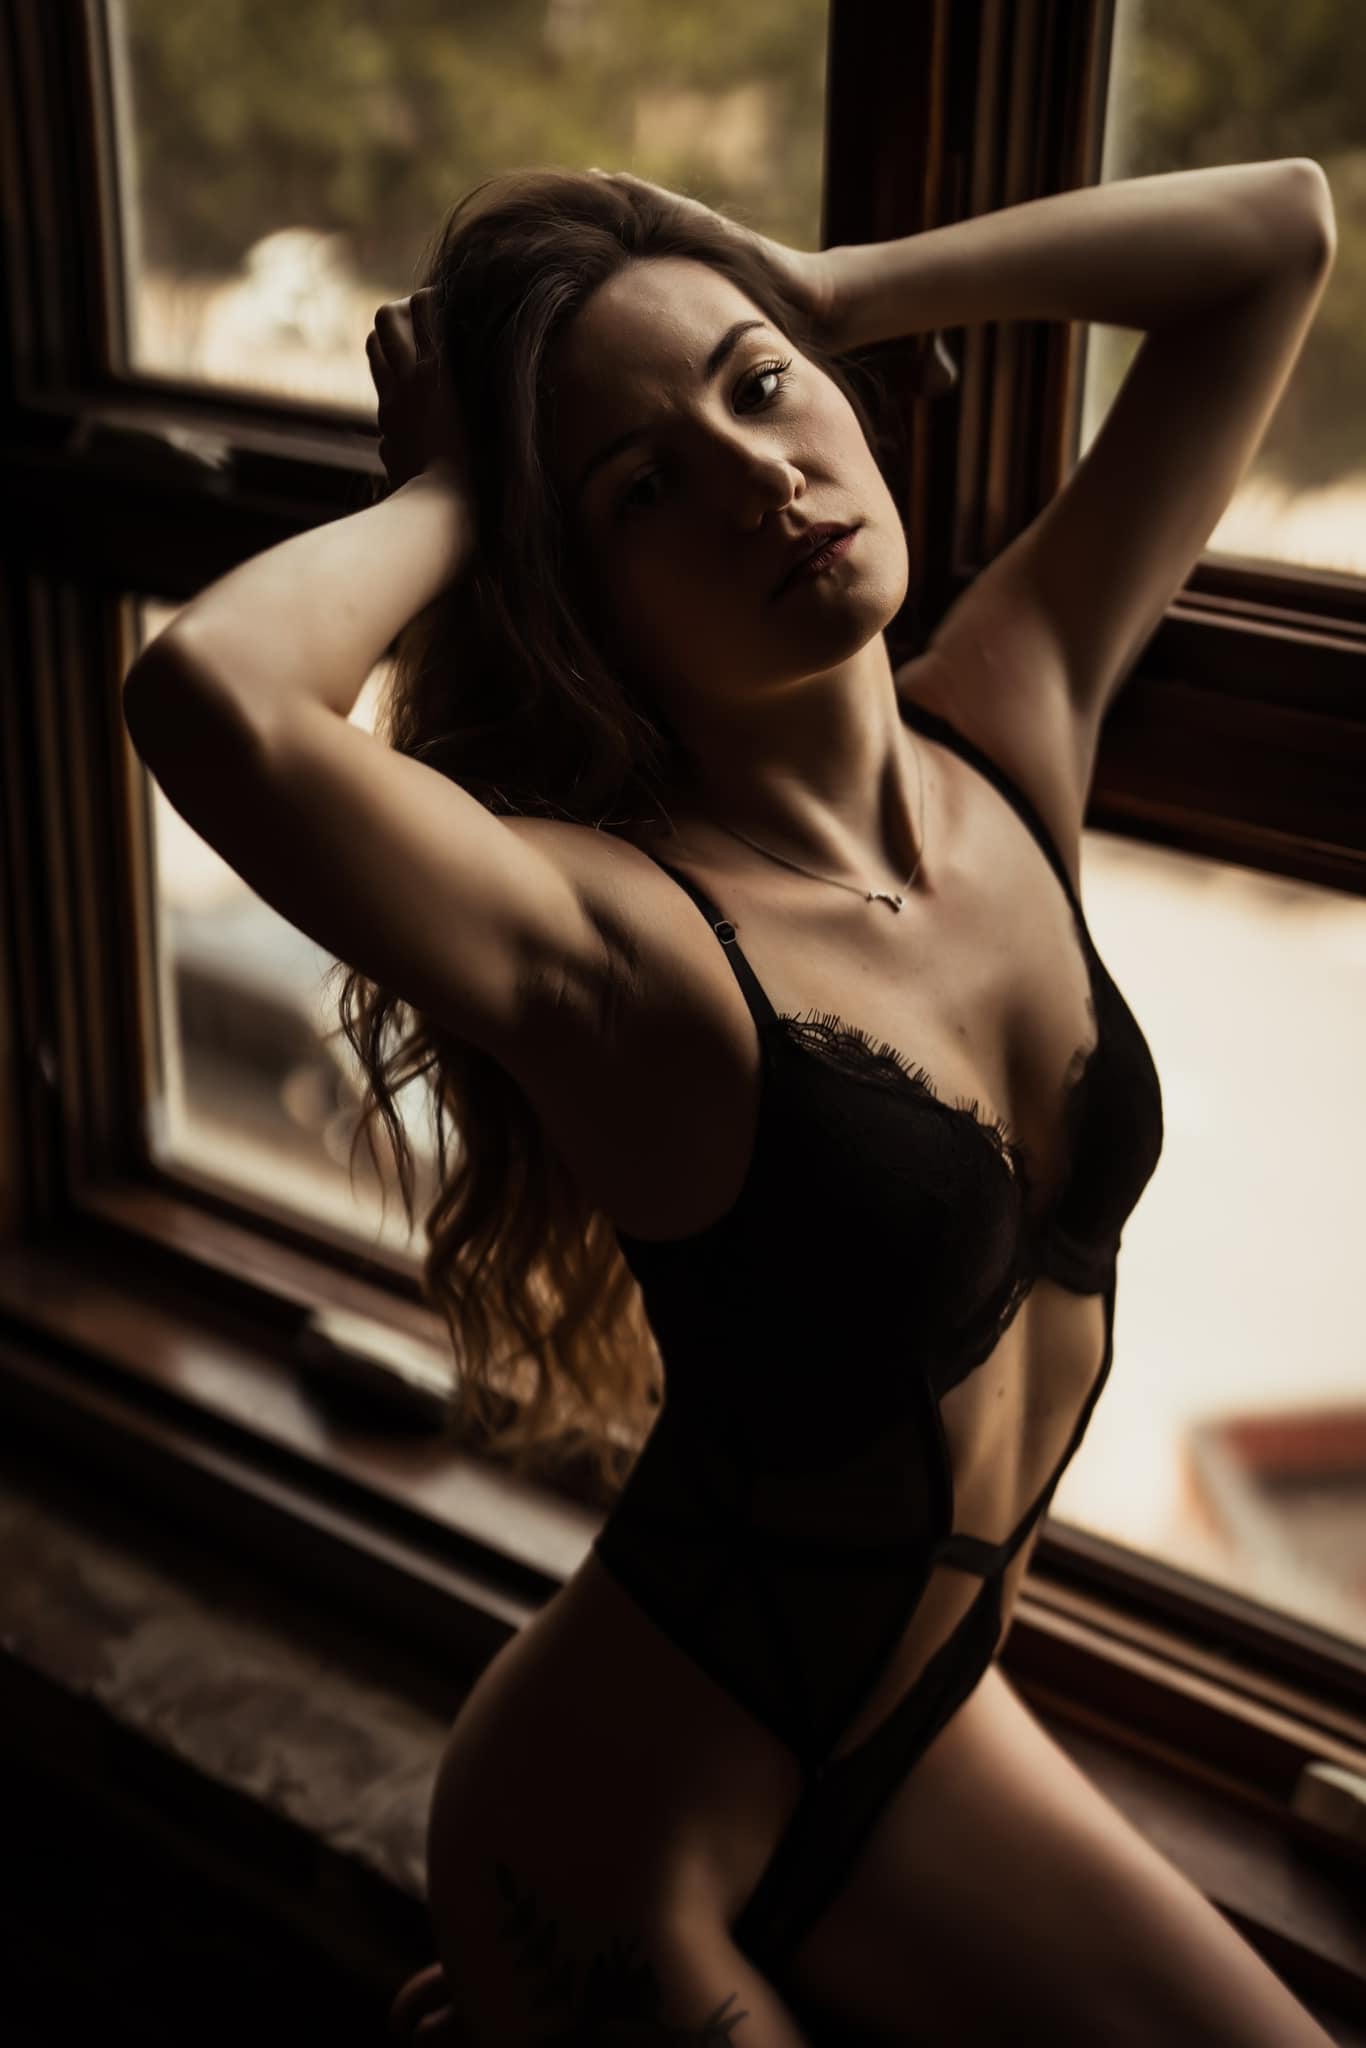 Brunette with hands on her head wearing a black lingerie outfit while posing in the window at Elevation Boudoir studio in downtown Tuscaloosa AL